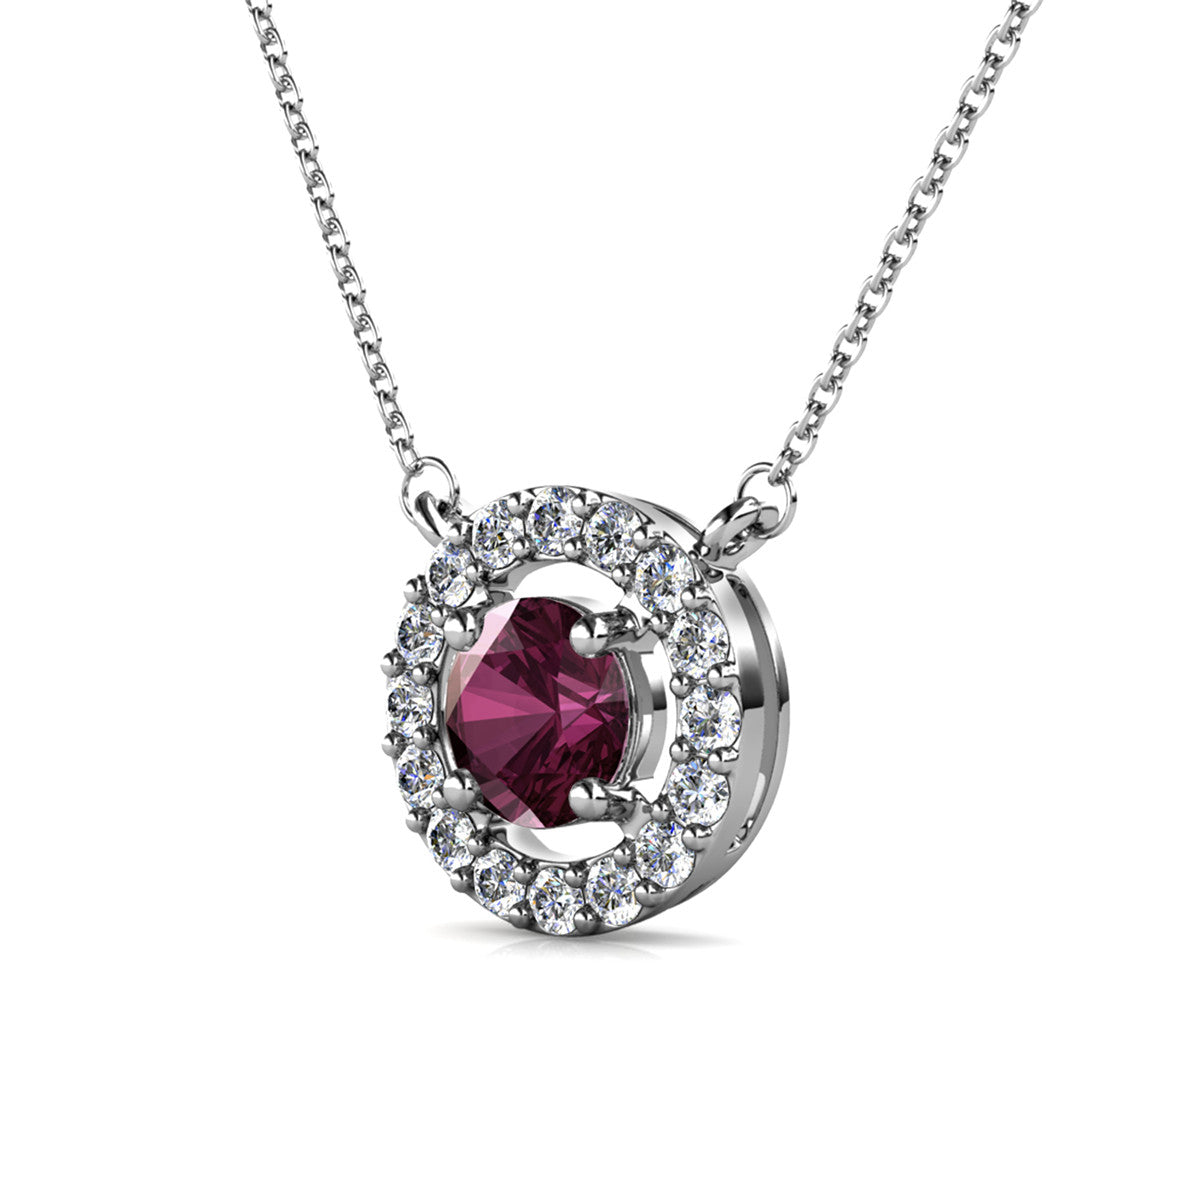 Royal February Birthstone Amethyst Necklace, 18k White Gold Plated Silver Halo Necklace with Round Cut Crystal